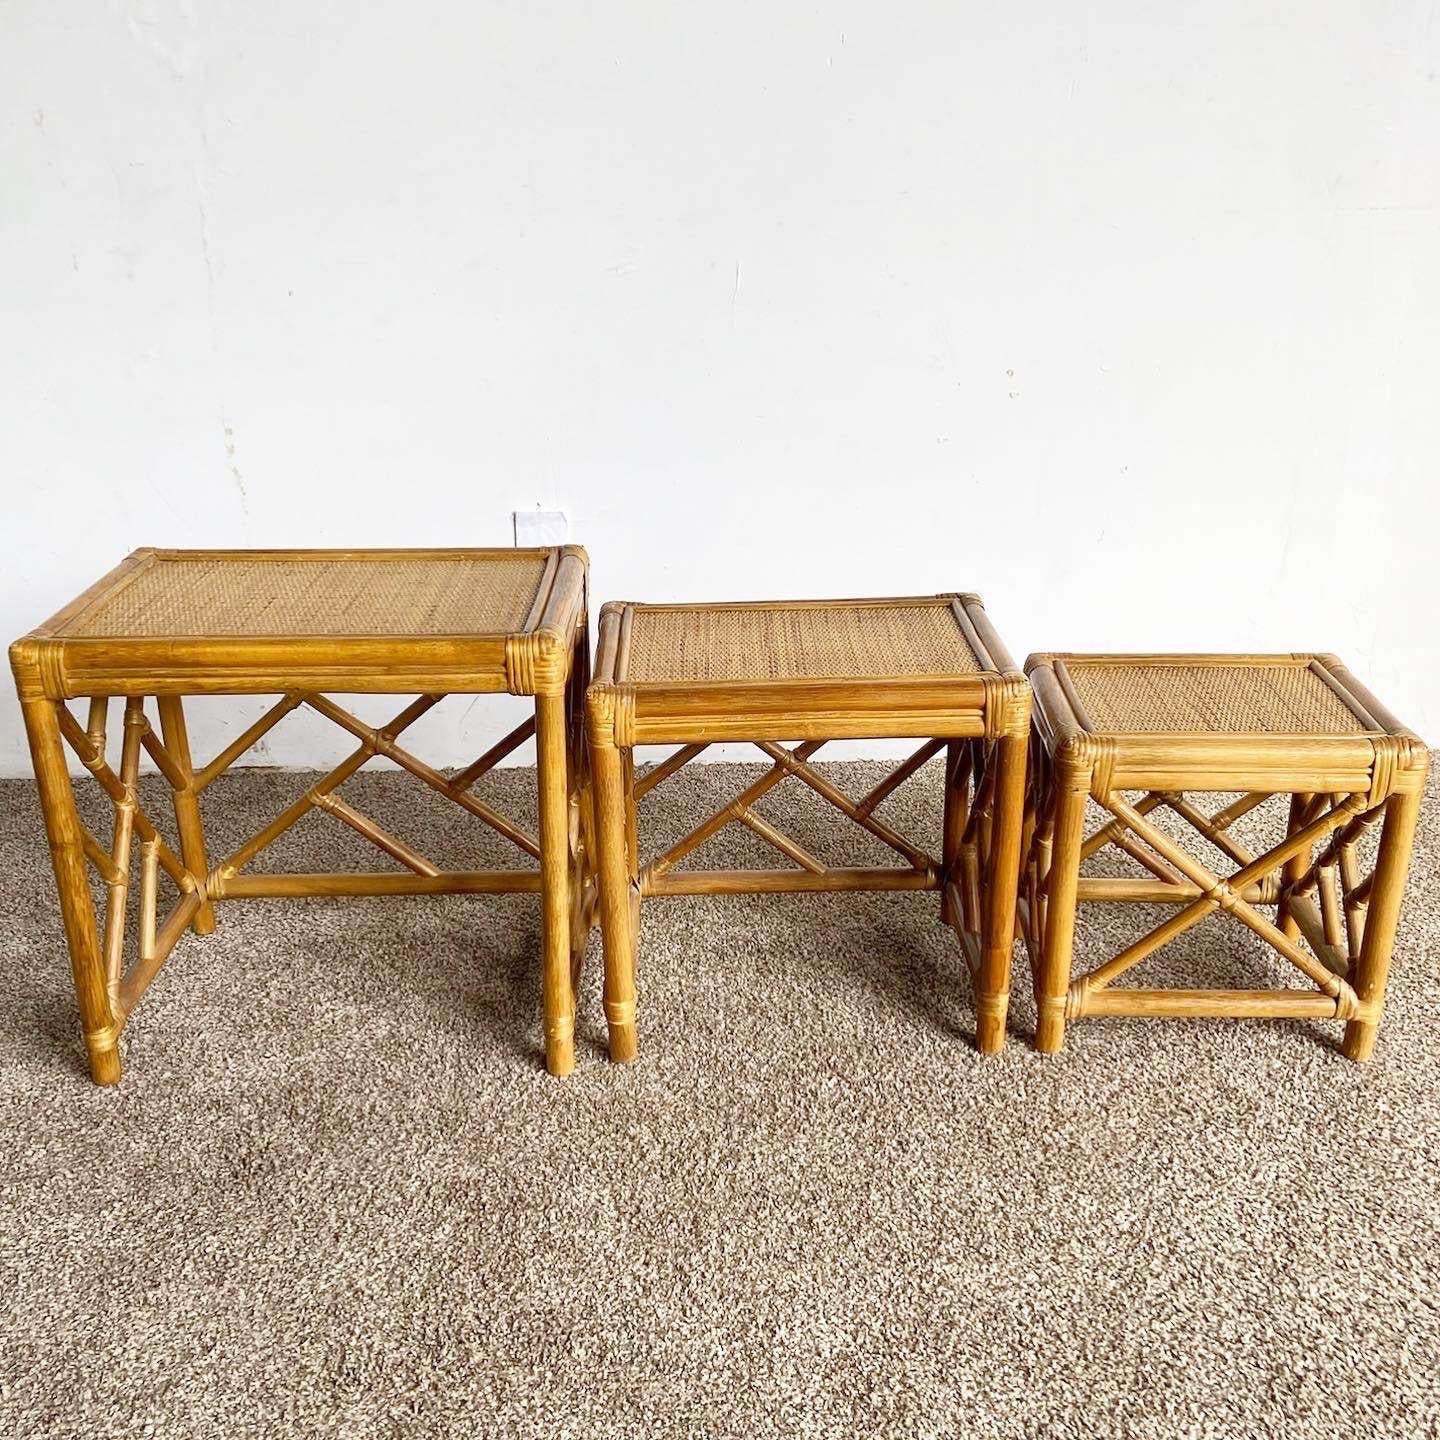 Boho Chic Chippendale Bamboo Rattan and Wicker Nesting Tables - Set of 3 In Good Condition For Sale In Delray Beach, FL